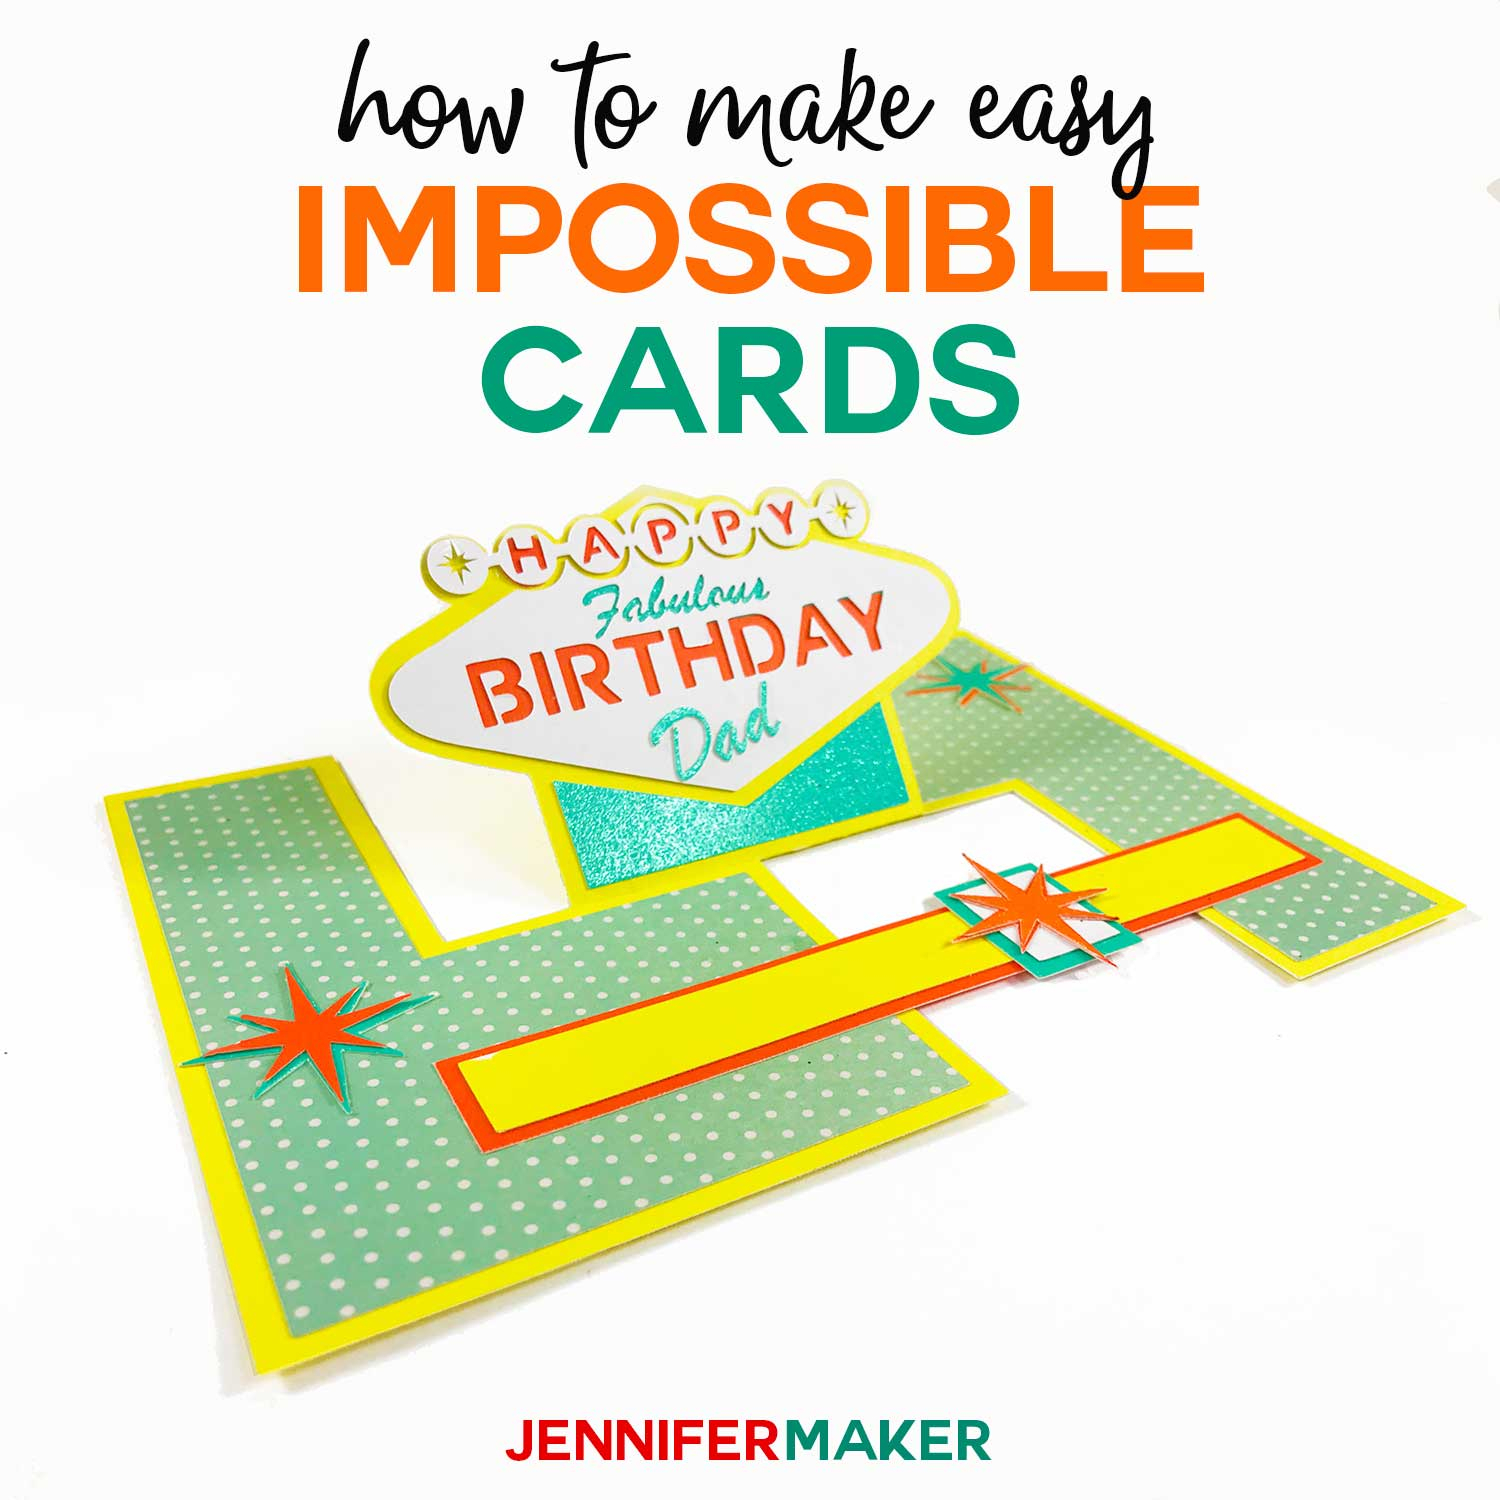 Impossible Card Templates: Super Easy Pop Up Cards Throughout Free Printable Pop Up Card Templates